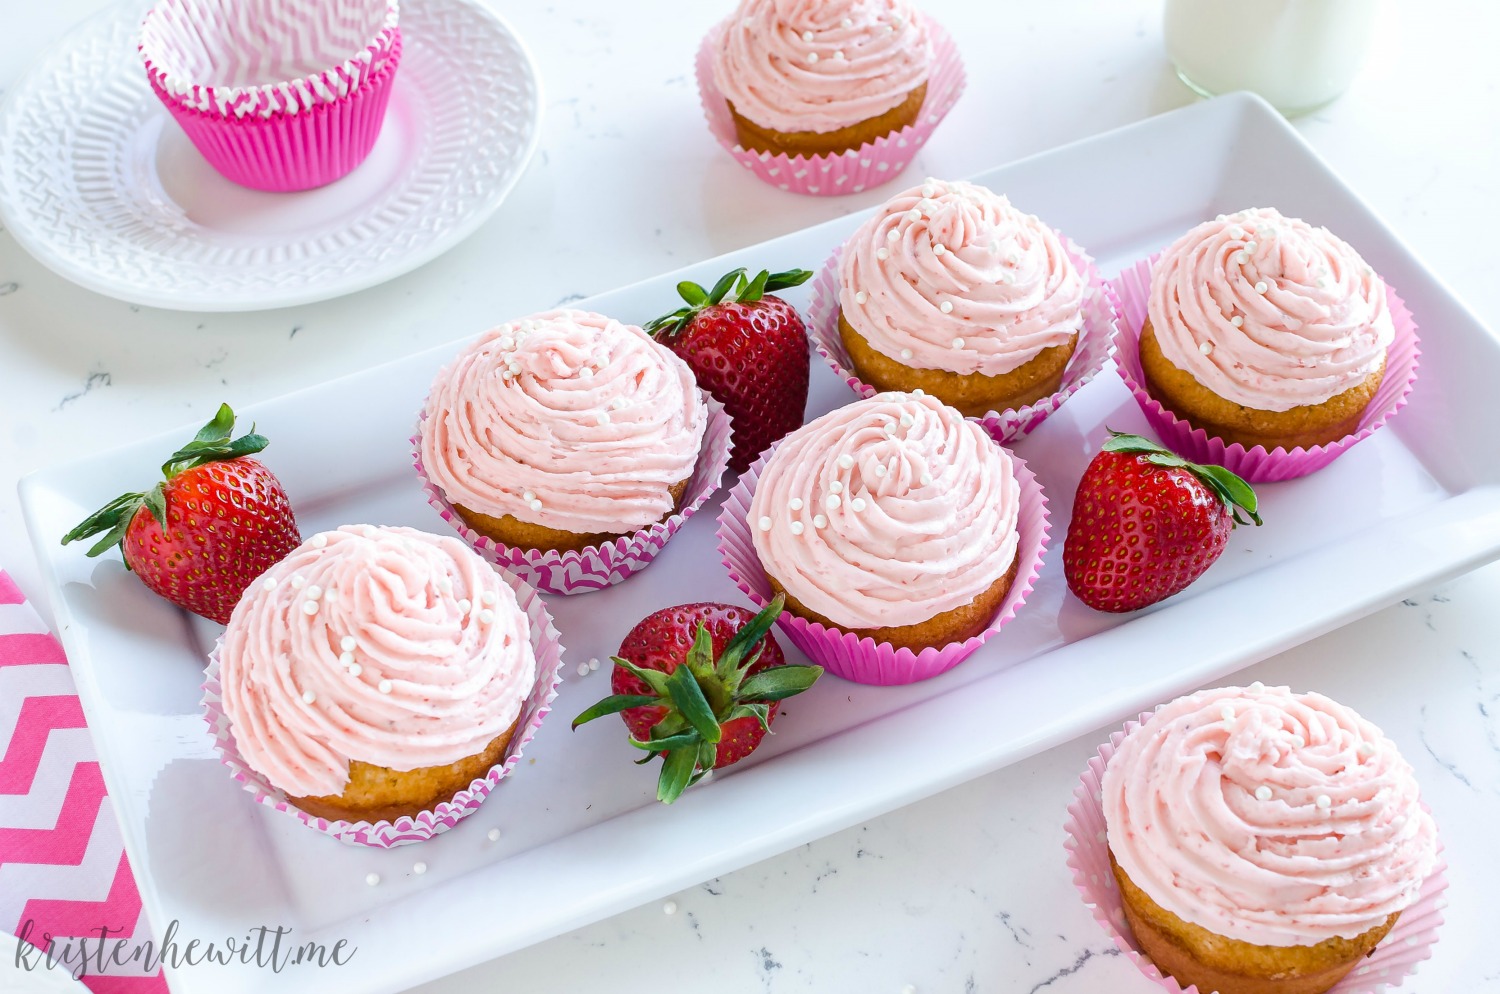 Looking for a decadent cupcake recipe using strawberries? Try this copycat recipe for Sprinkles Strawberry Cupcakes! The best cupcake you'll ever try!